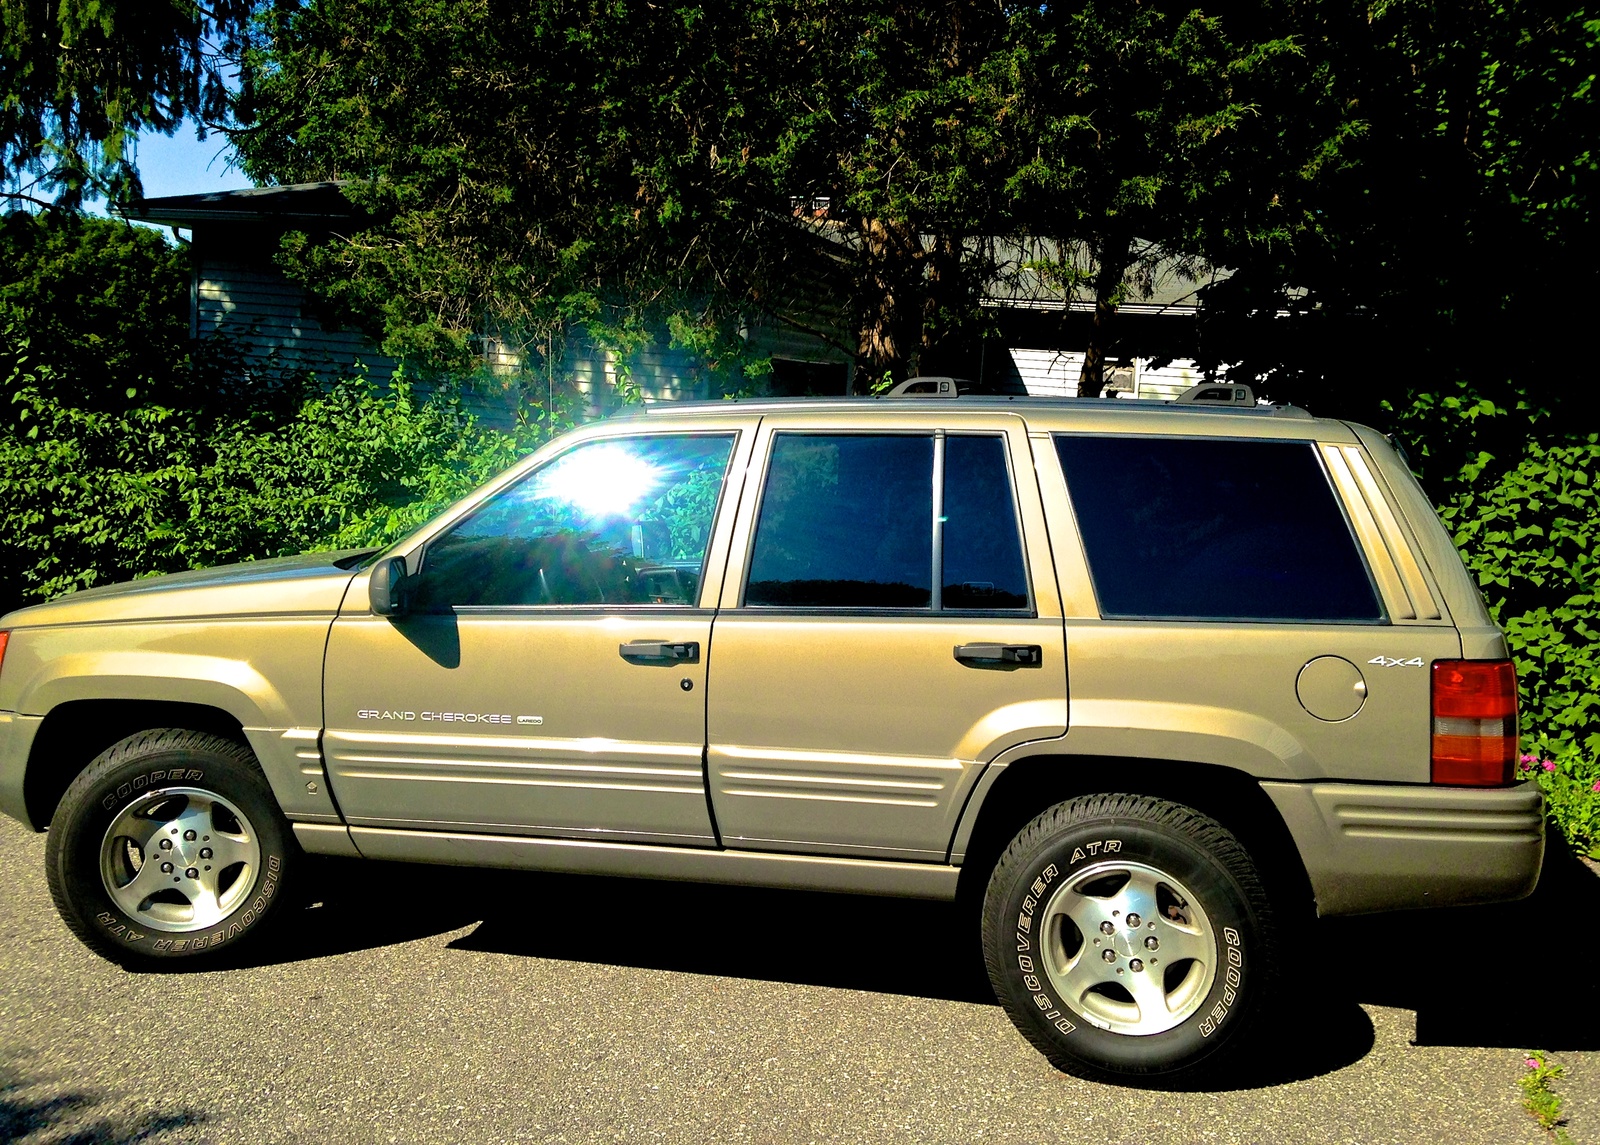 1998 Ford explorer limited edition specs